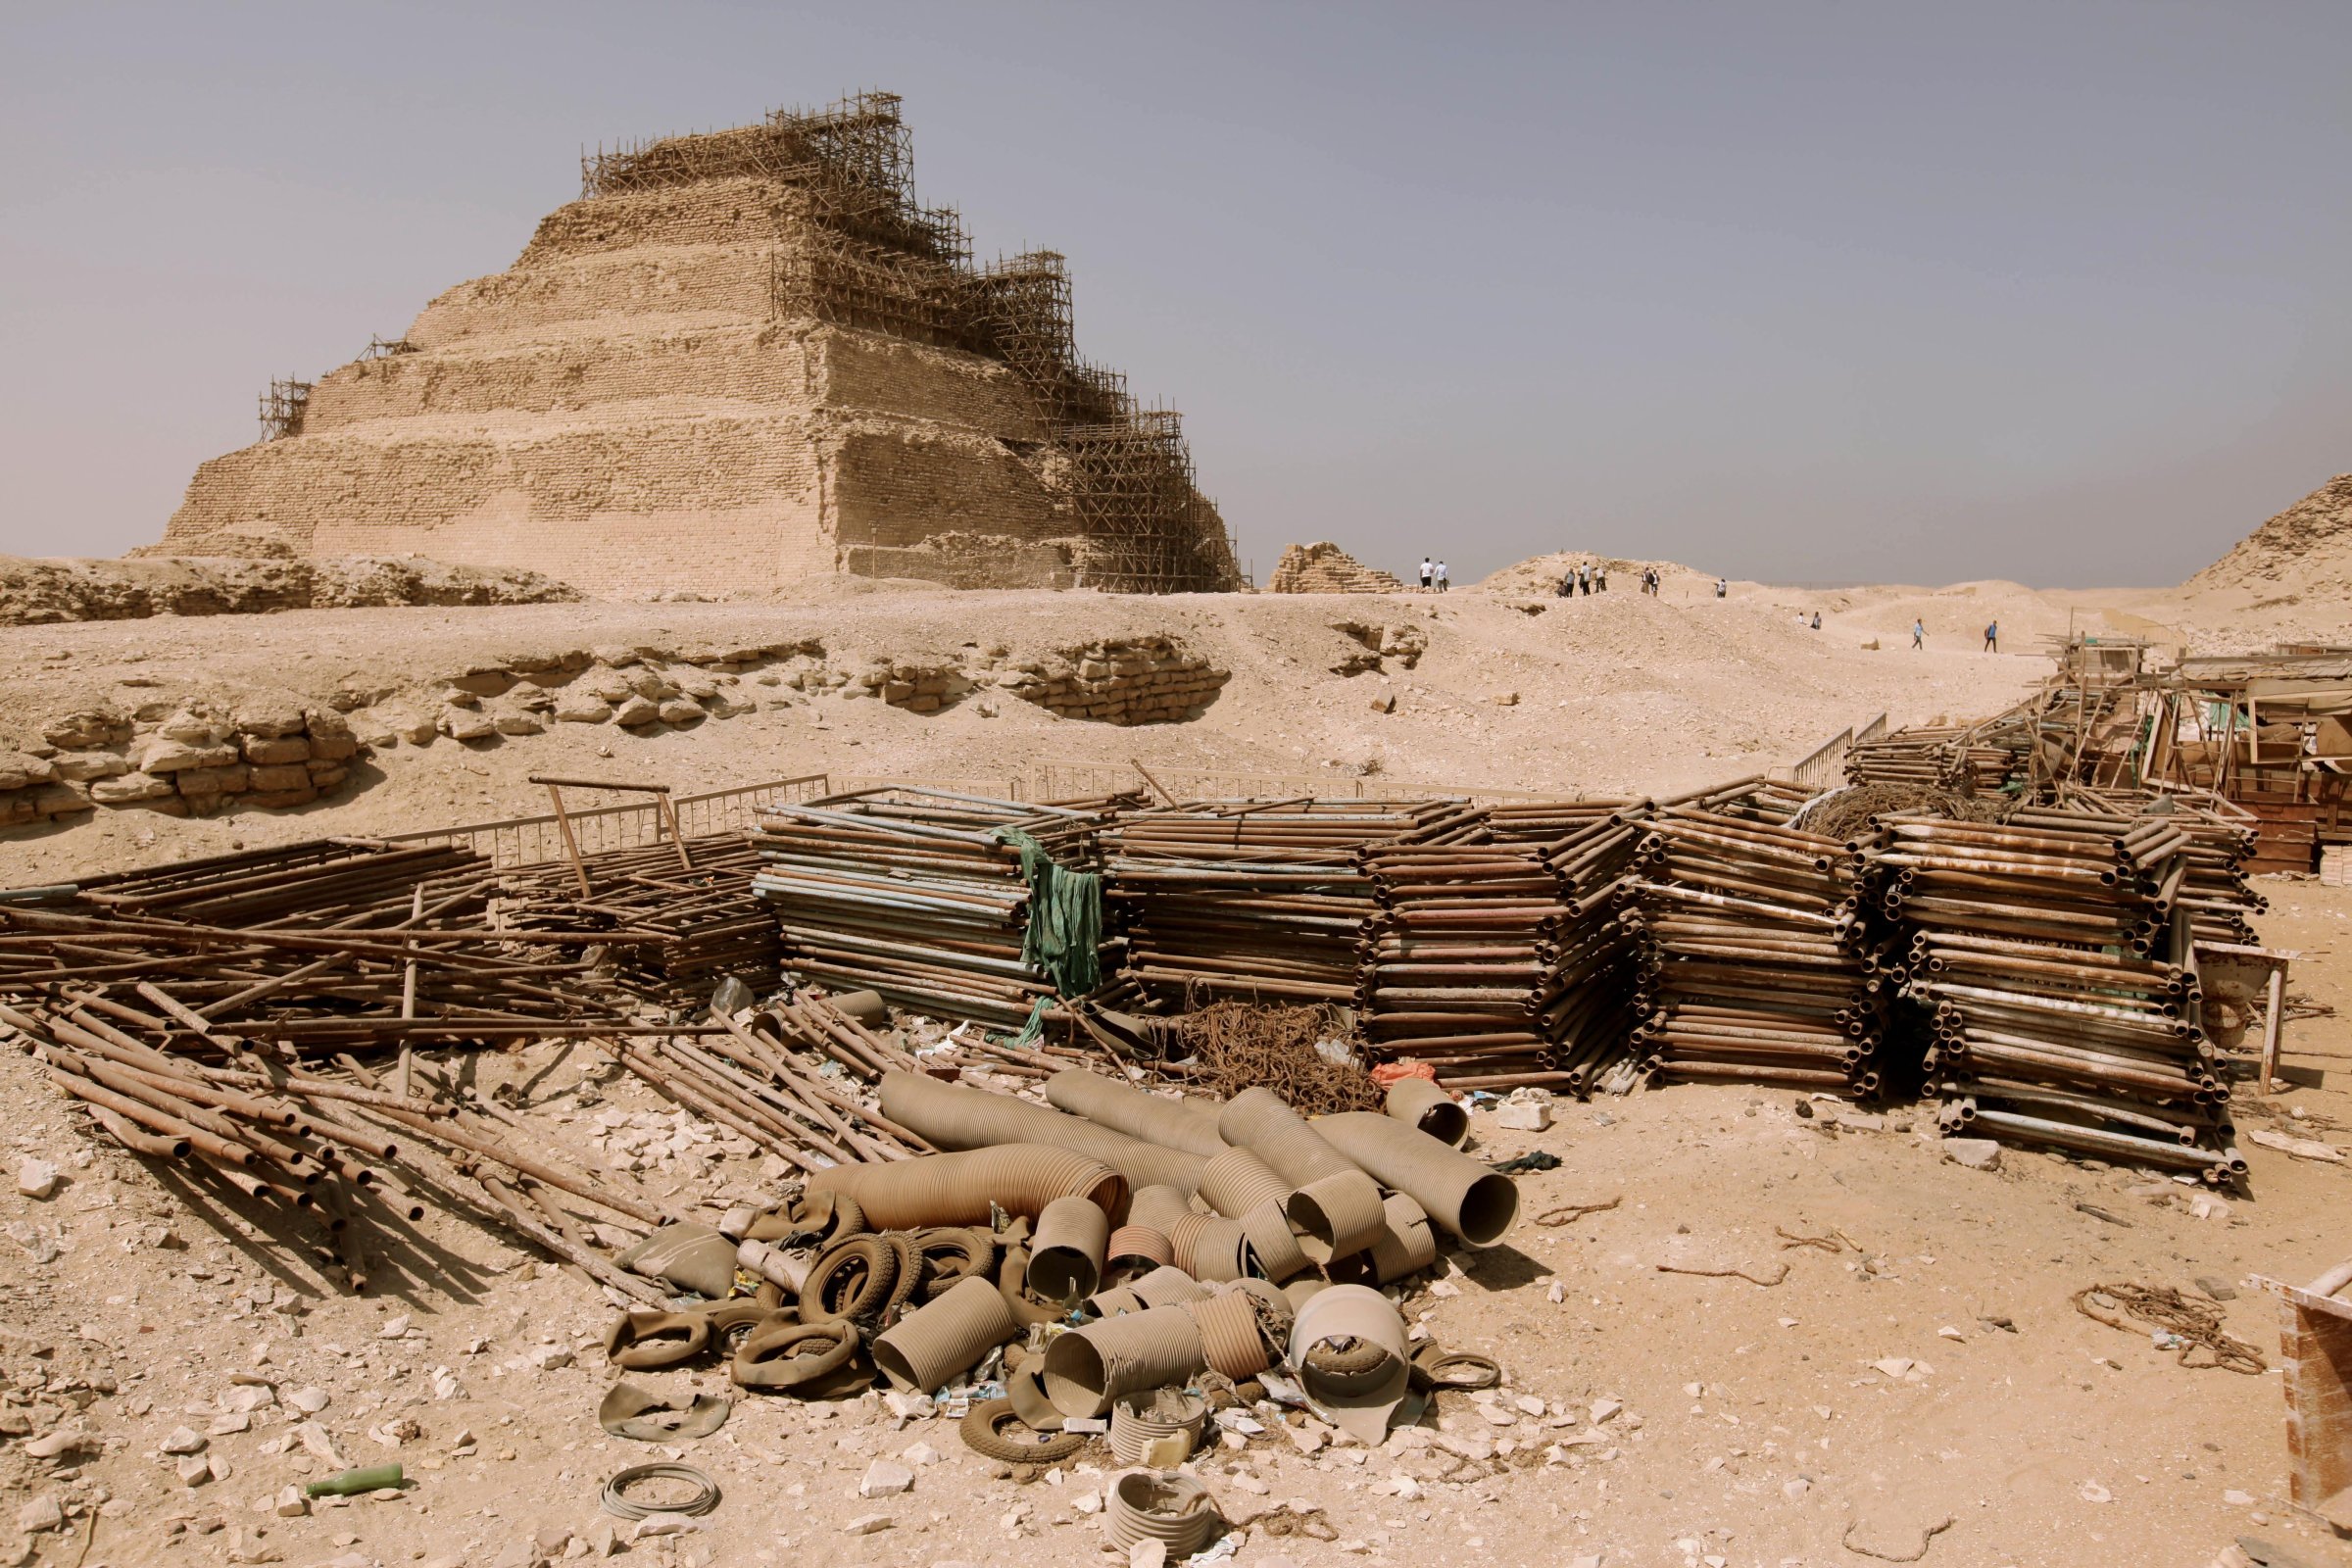 Building materials gather dust at the foot of the Djoser Pyramid in Saqqara, Egypt on Sept. 16, 2014.